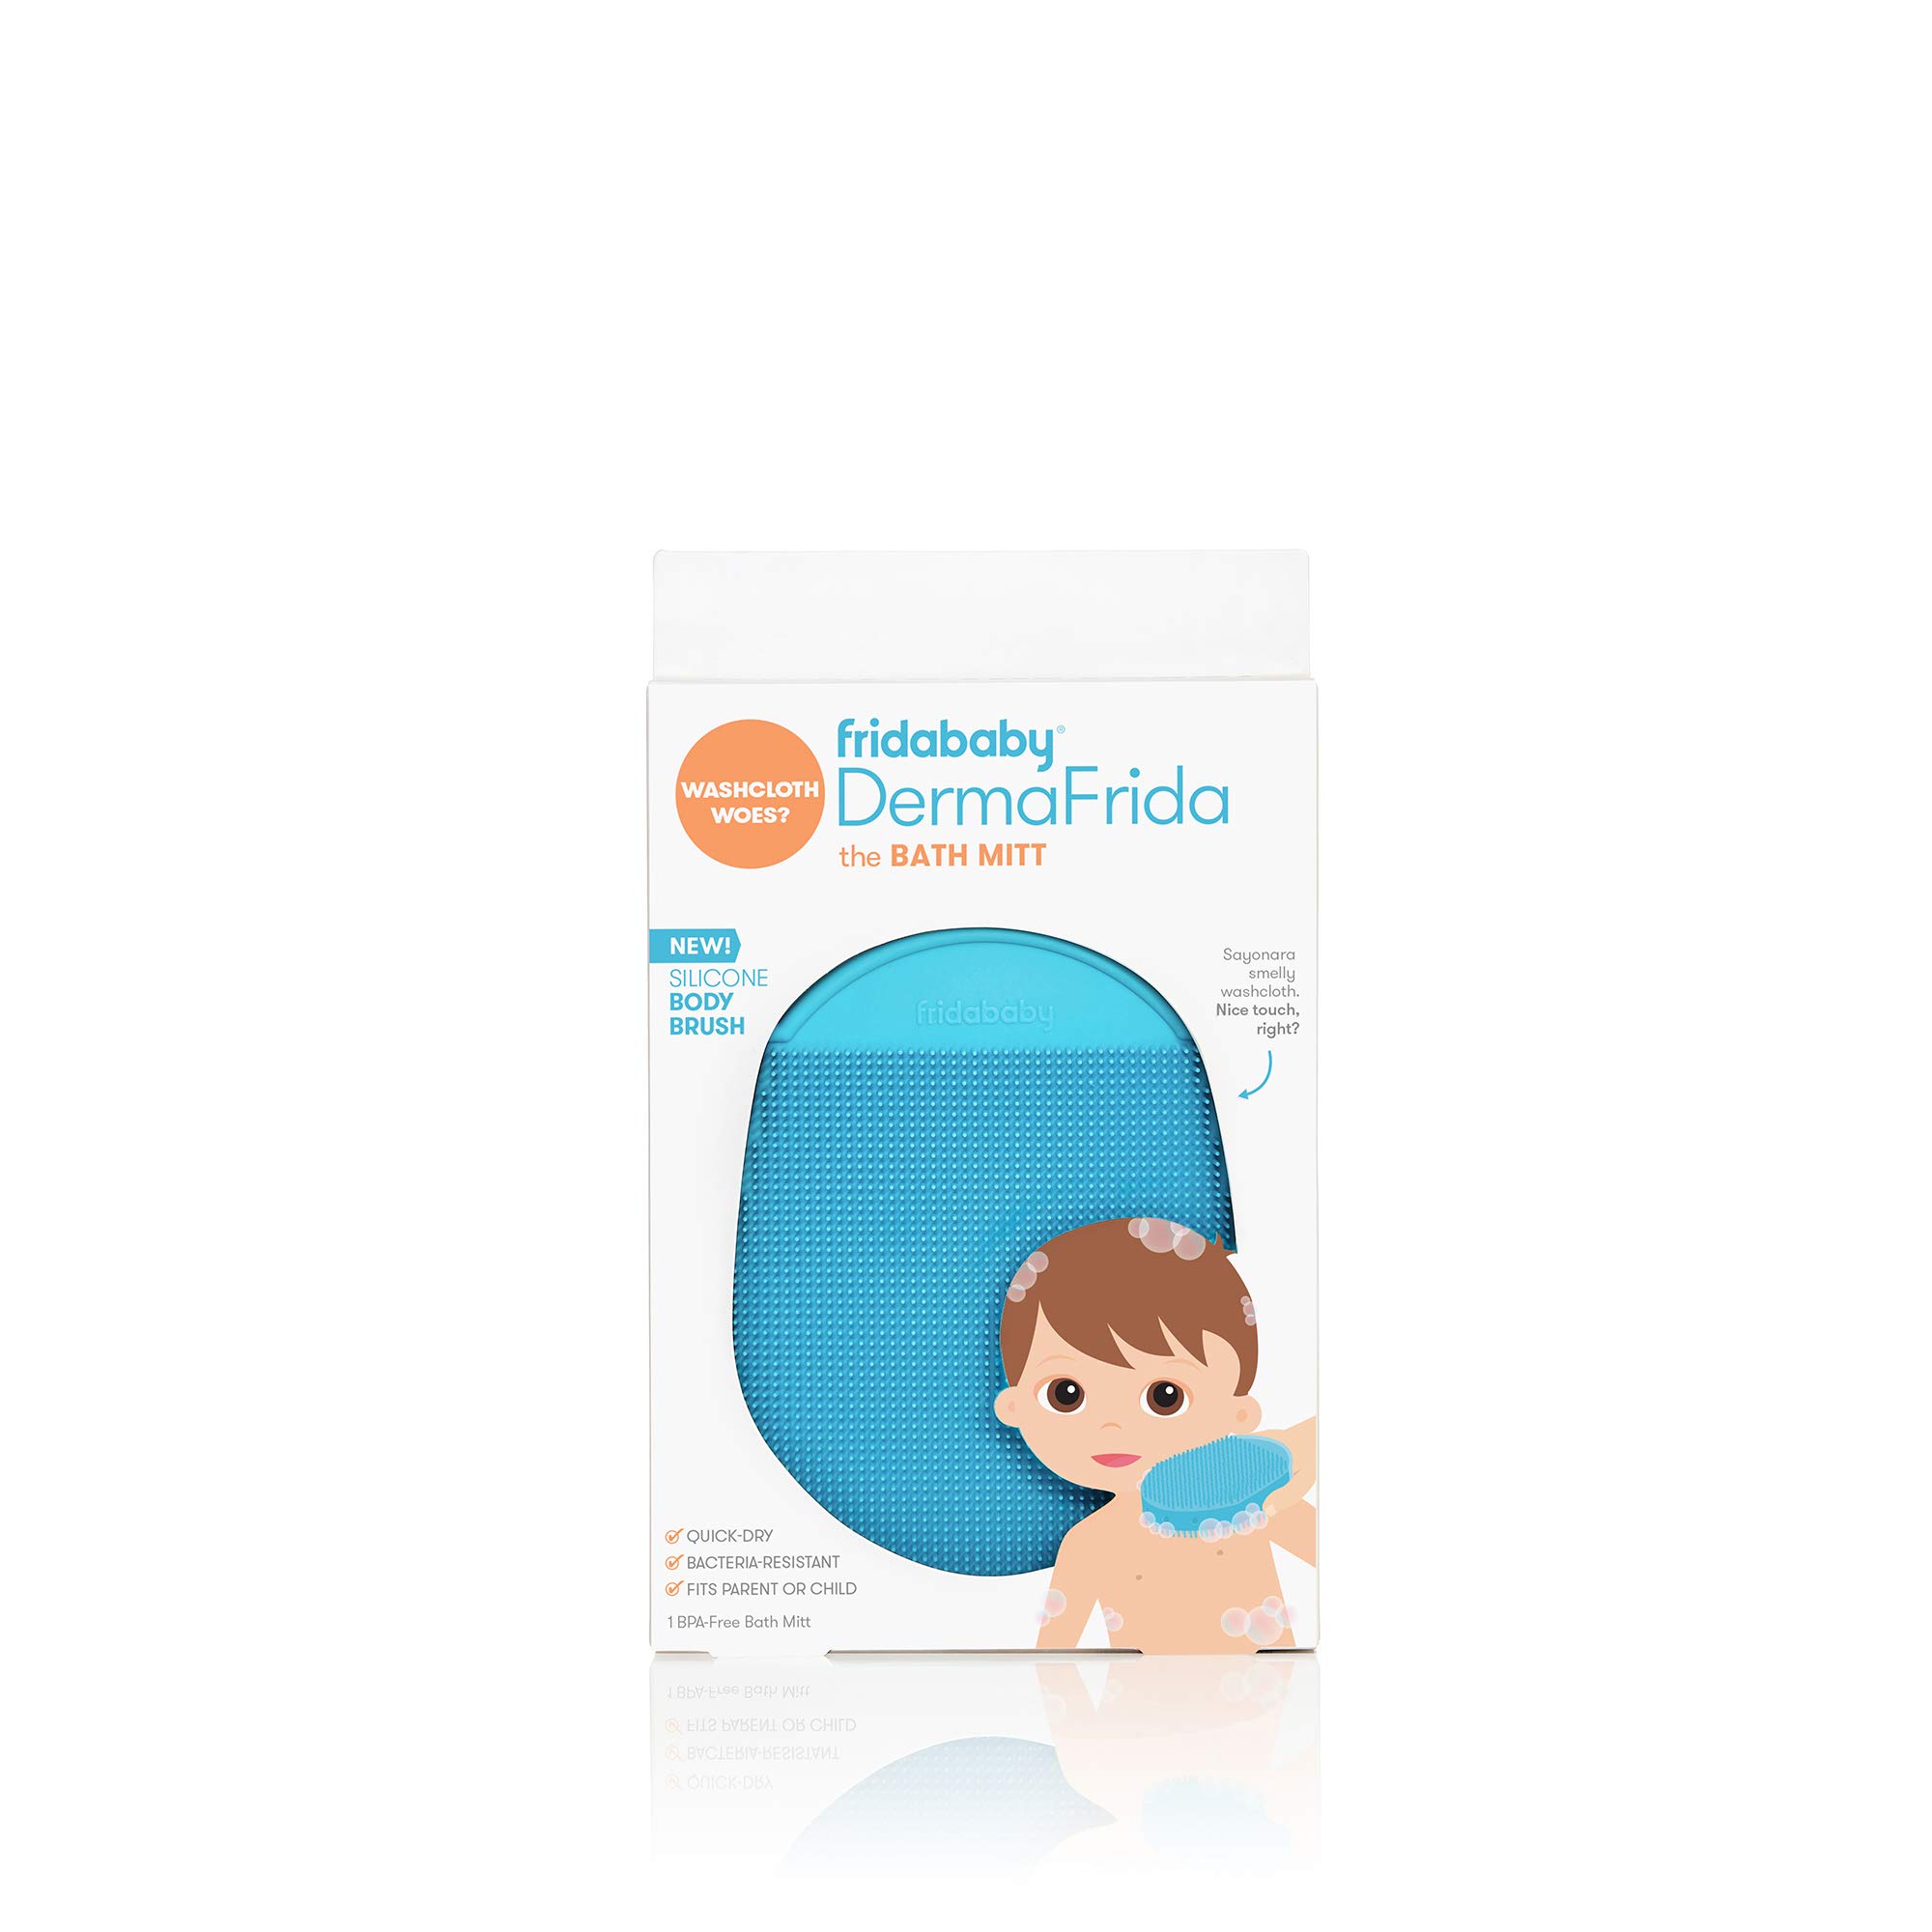 Frida Baby DermaFrida the Bath Mitt | Toddler Quick-Dry Body Bath Brush, Silicone, Replacement to Kid's Washcloth | Fits Both Parent or Child for Early Stage Development